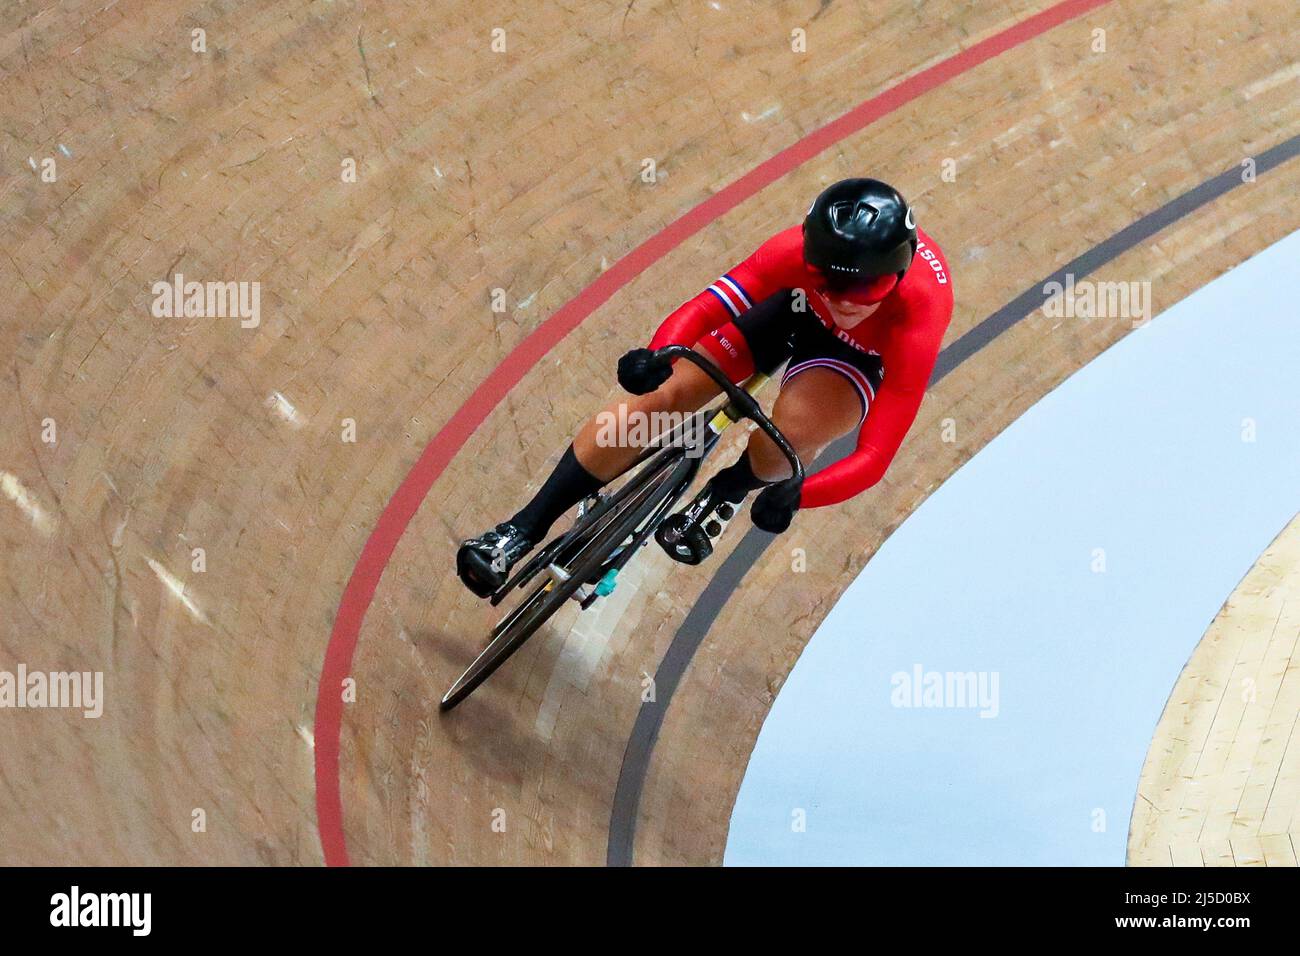 Glasgow, UK. 22nd Apr, 2022. On day two of the UCI Track Nations Cup, Women cyclists from across the world took part in the Women's Sprint qualifying race. Credit: Findlay/Alamy Live News Stock Photo